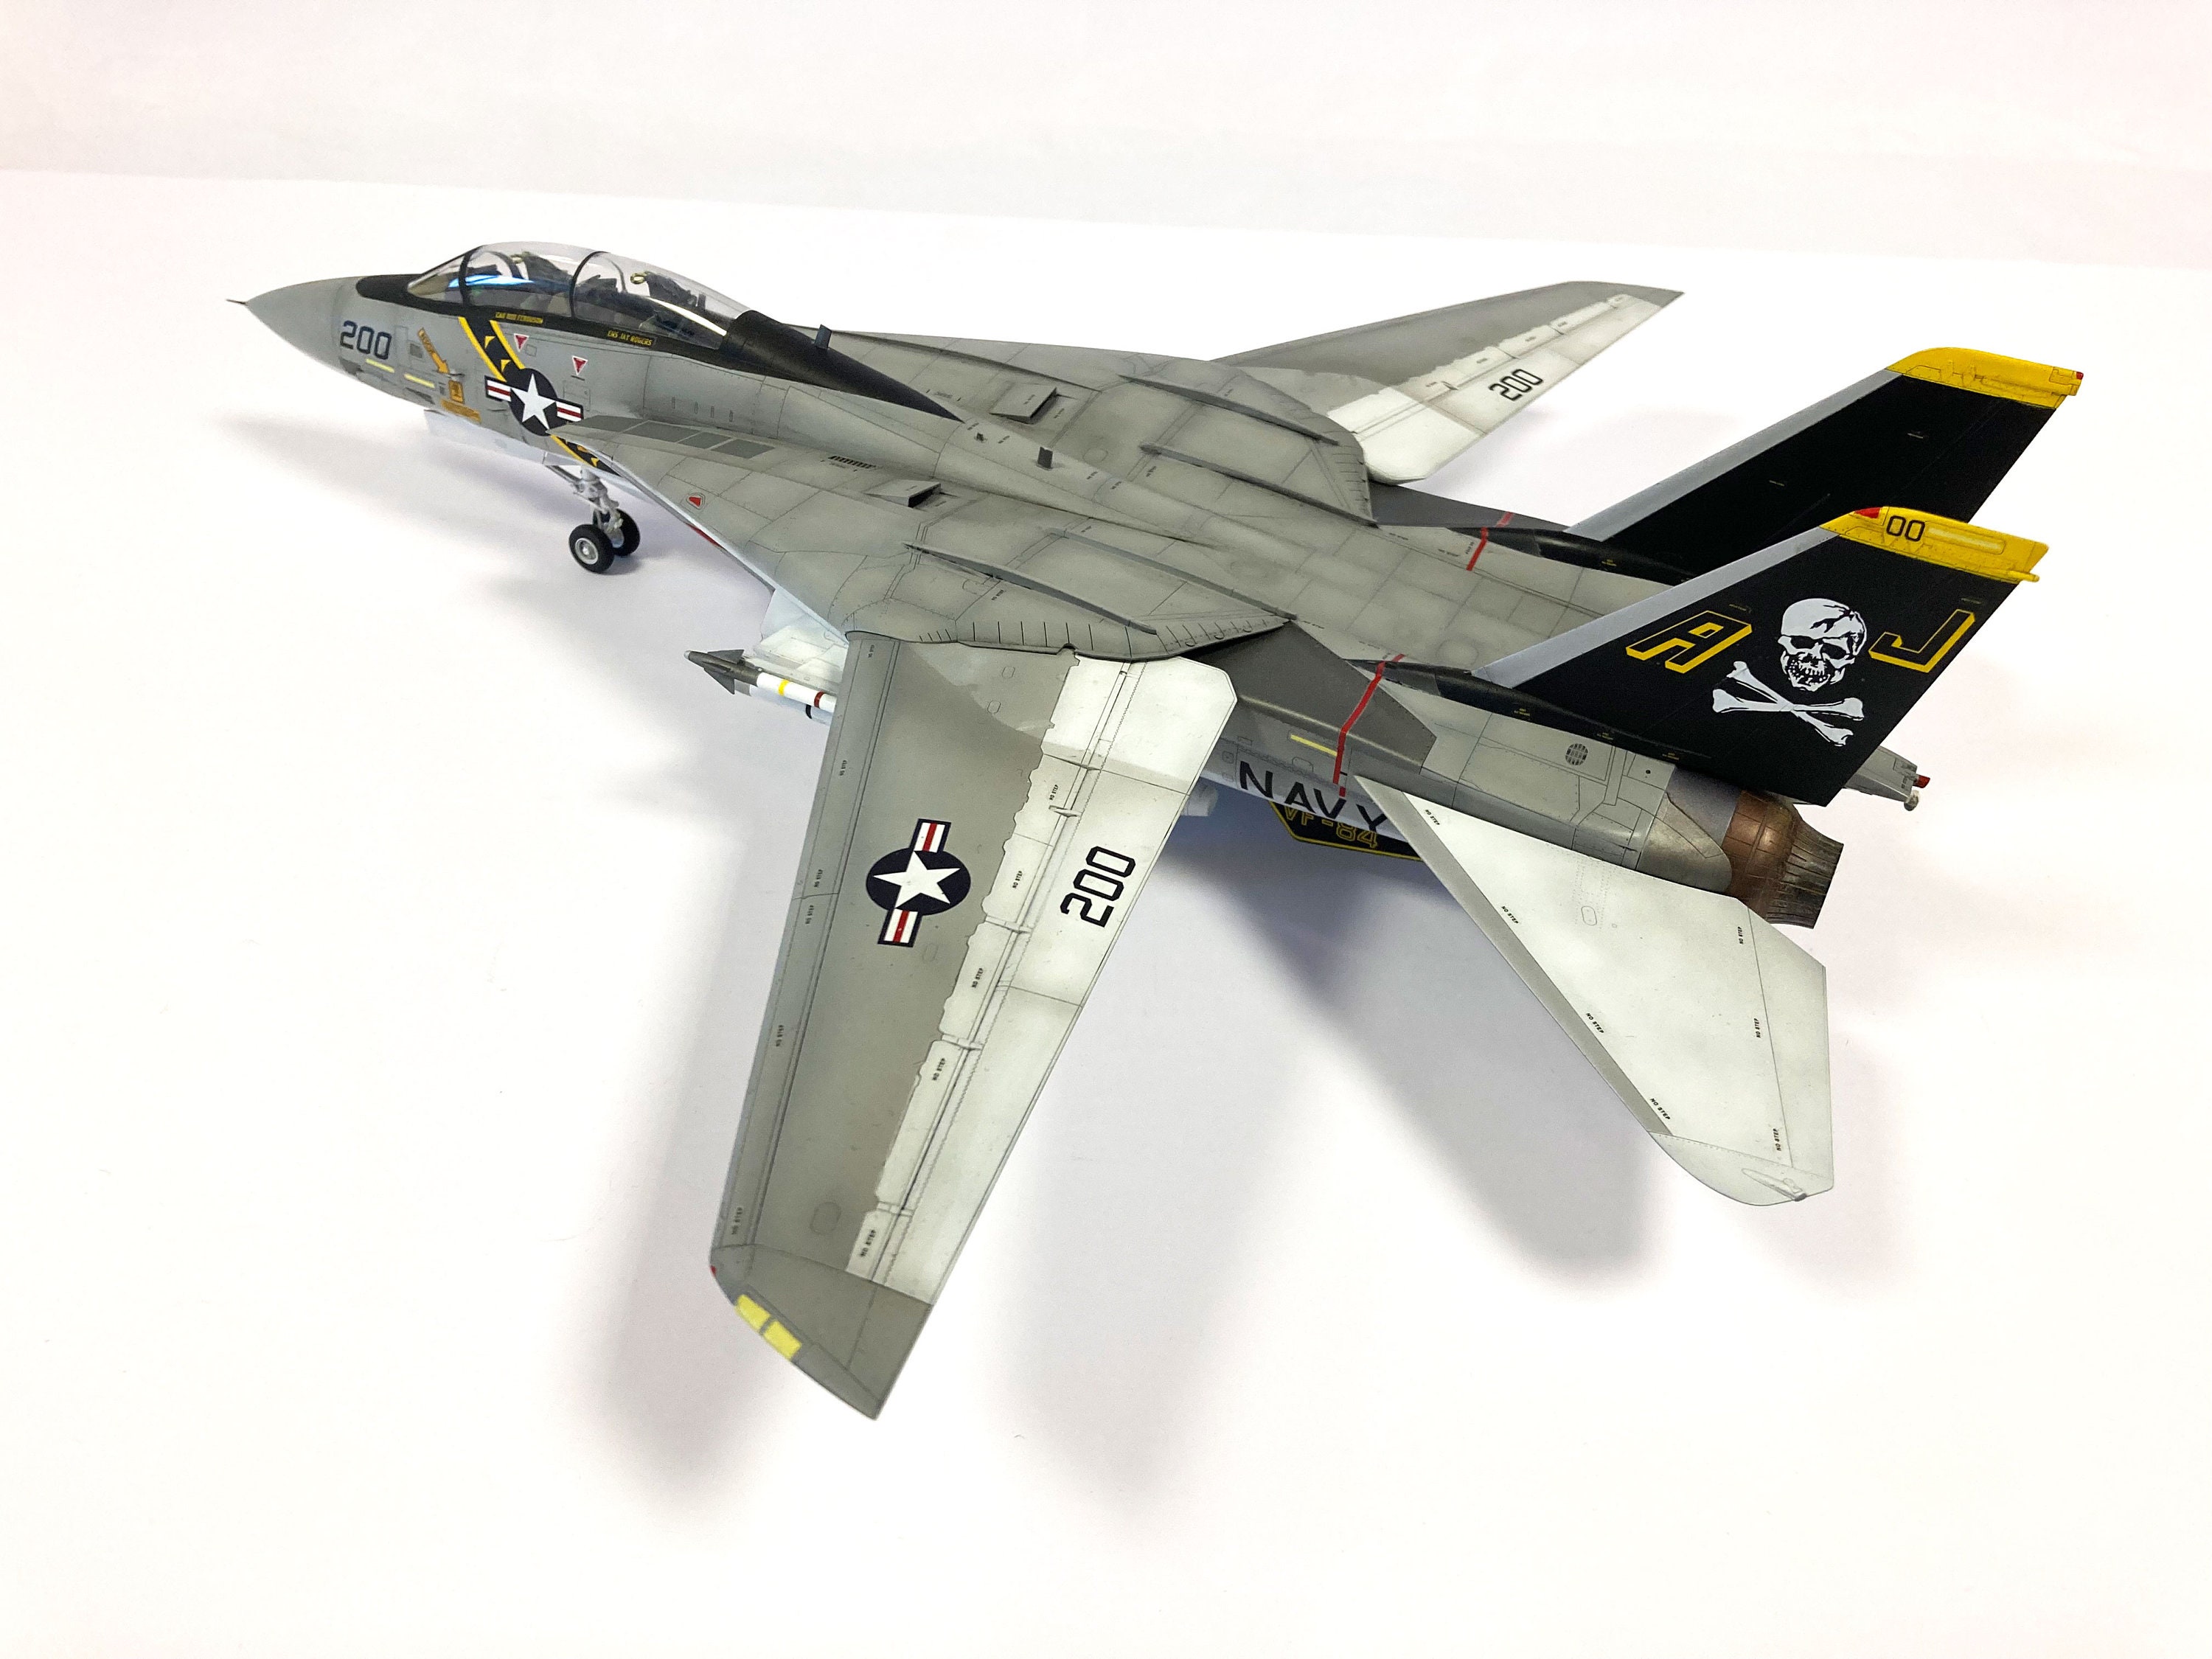 The new Tamiya 1/48 F14A Tomcat quick build and visual review